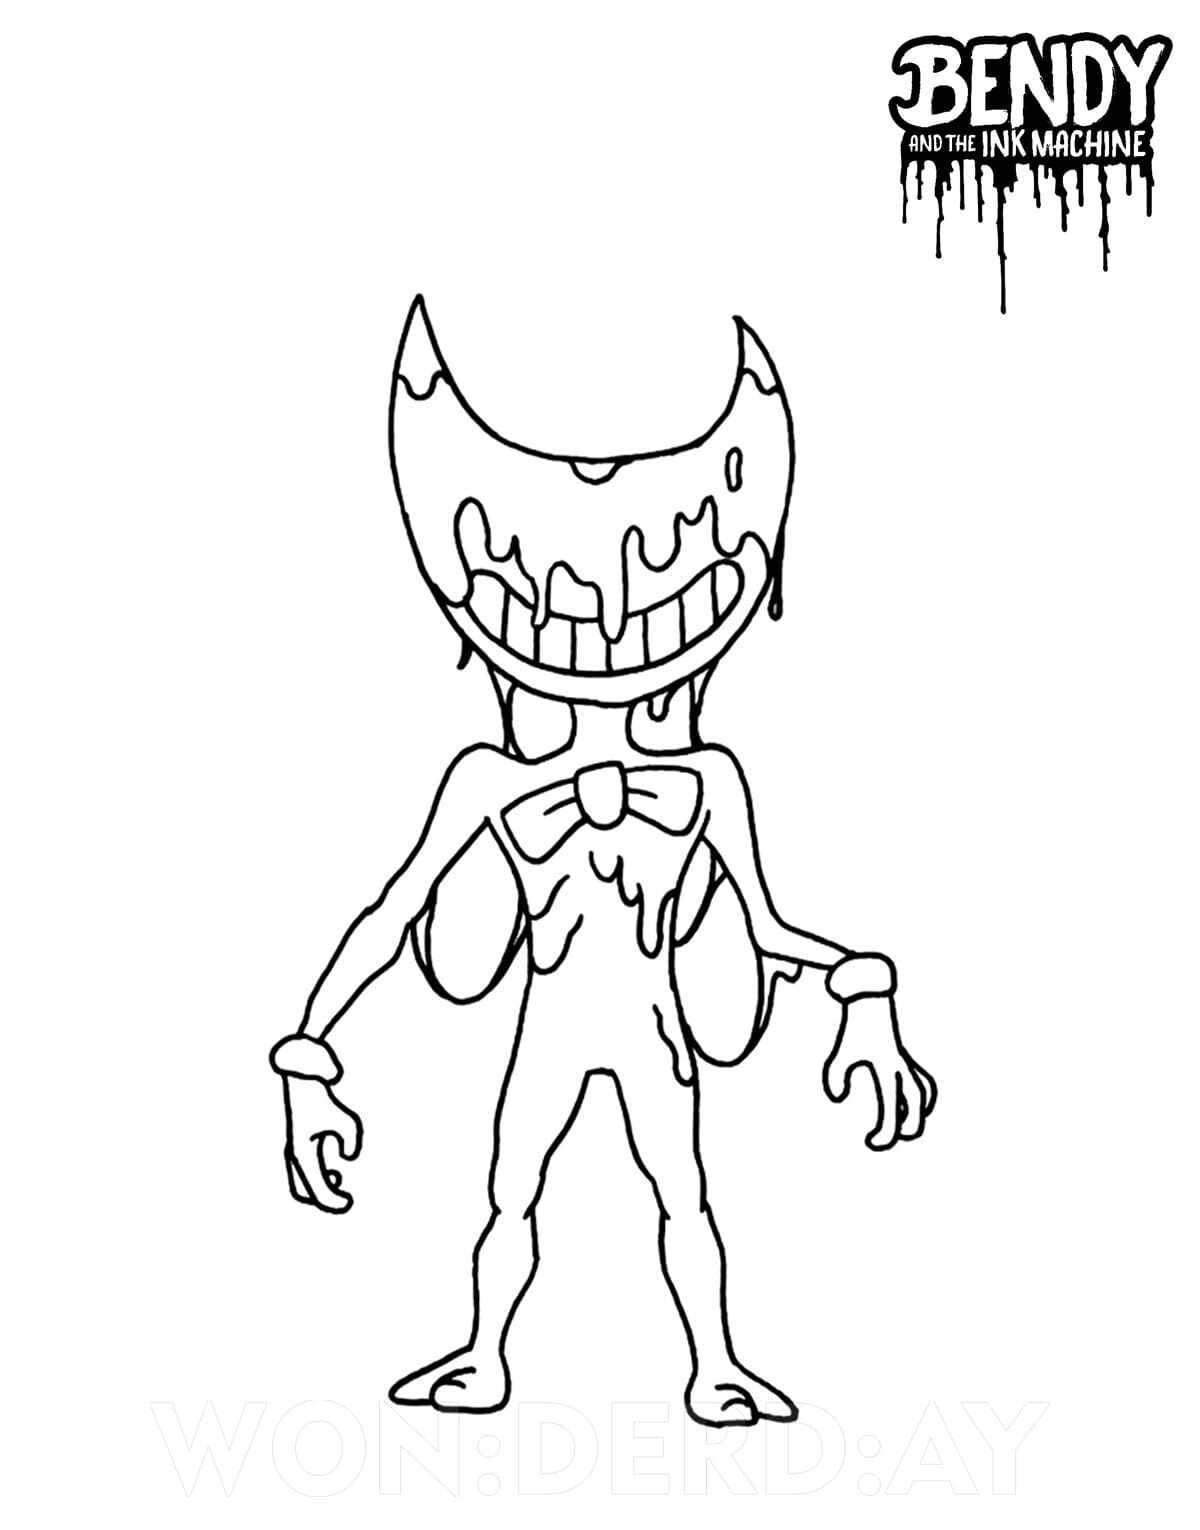 Bendy with the ink covered his face bring bow tie from Bendy and the Ink Machine Coloring Page